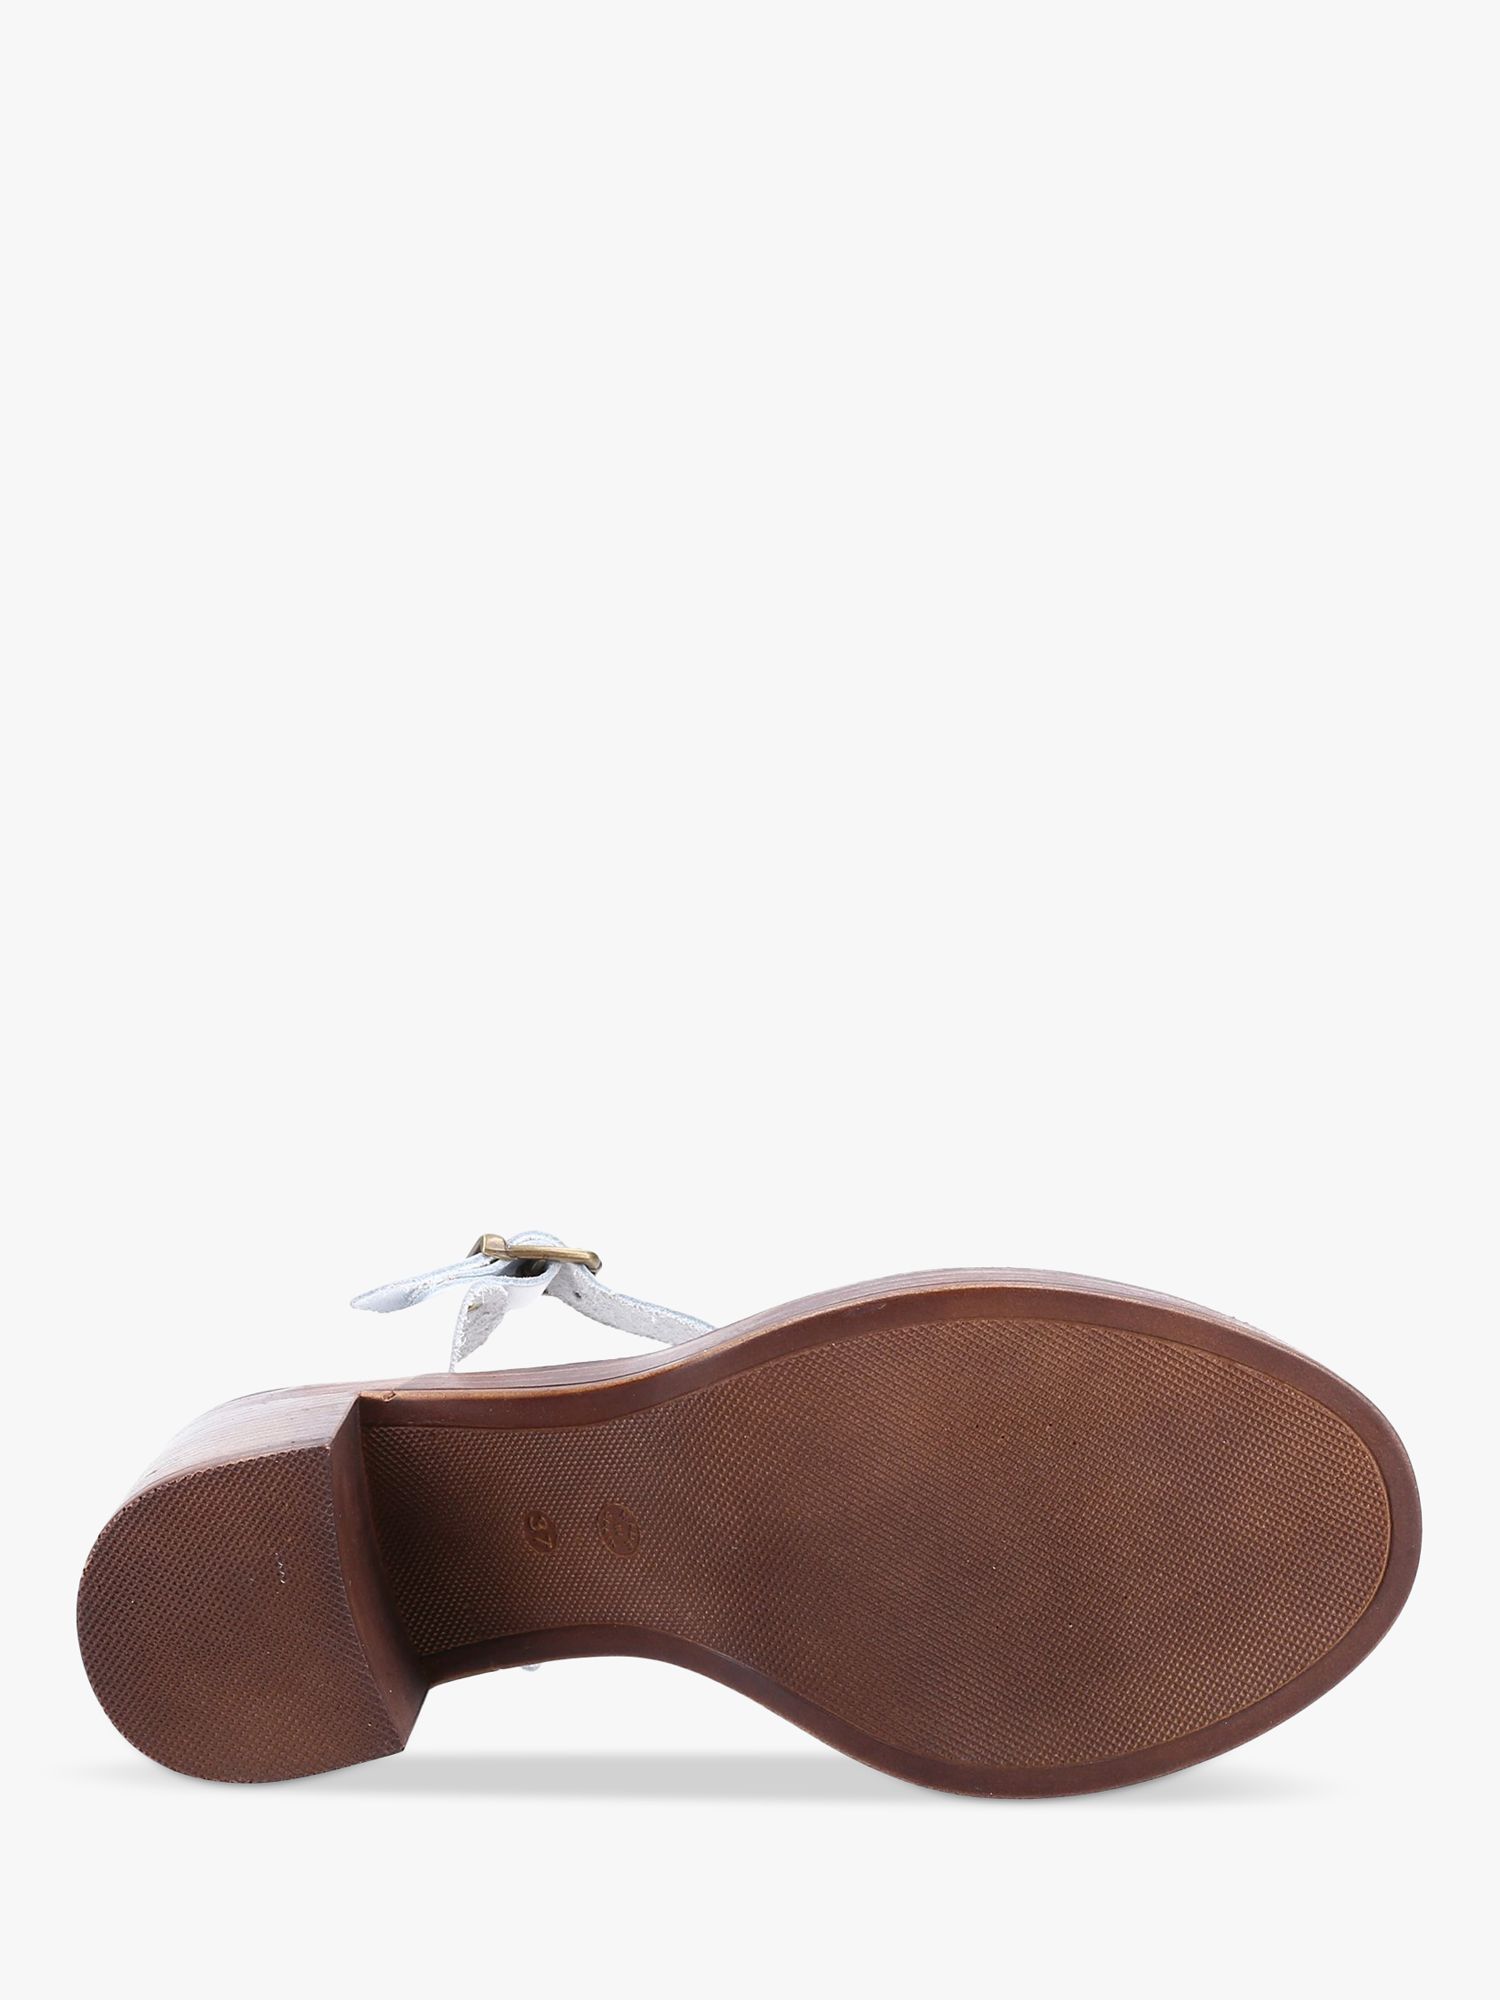 Buy Hush Puppies Georgia Leather Buckle Sandal Online at johnlewis.com